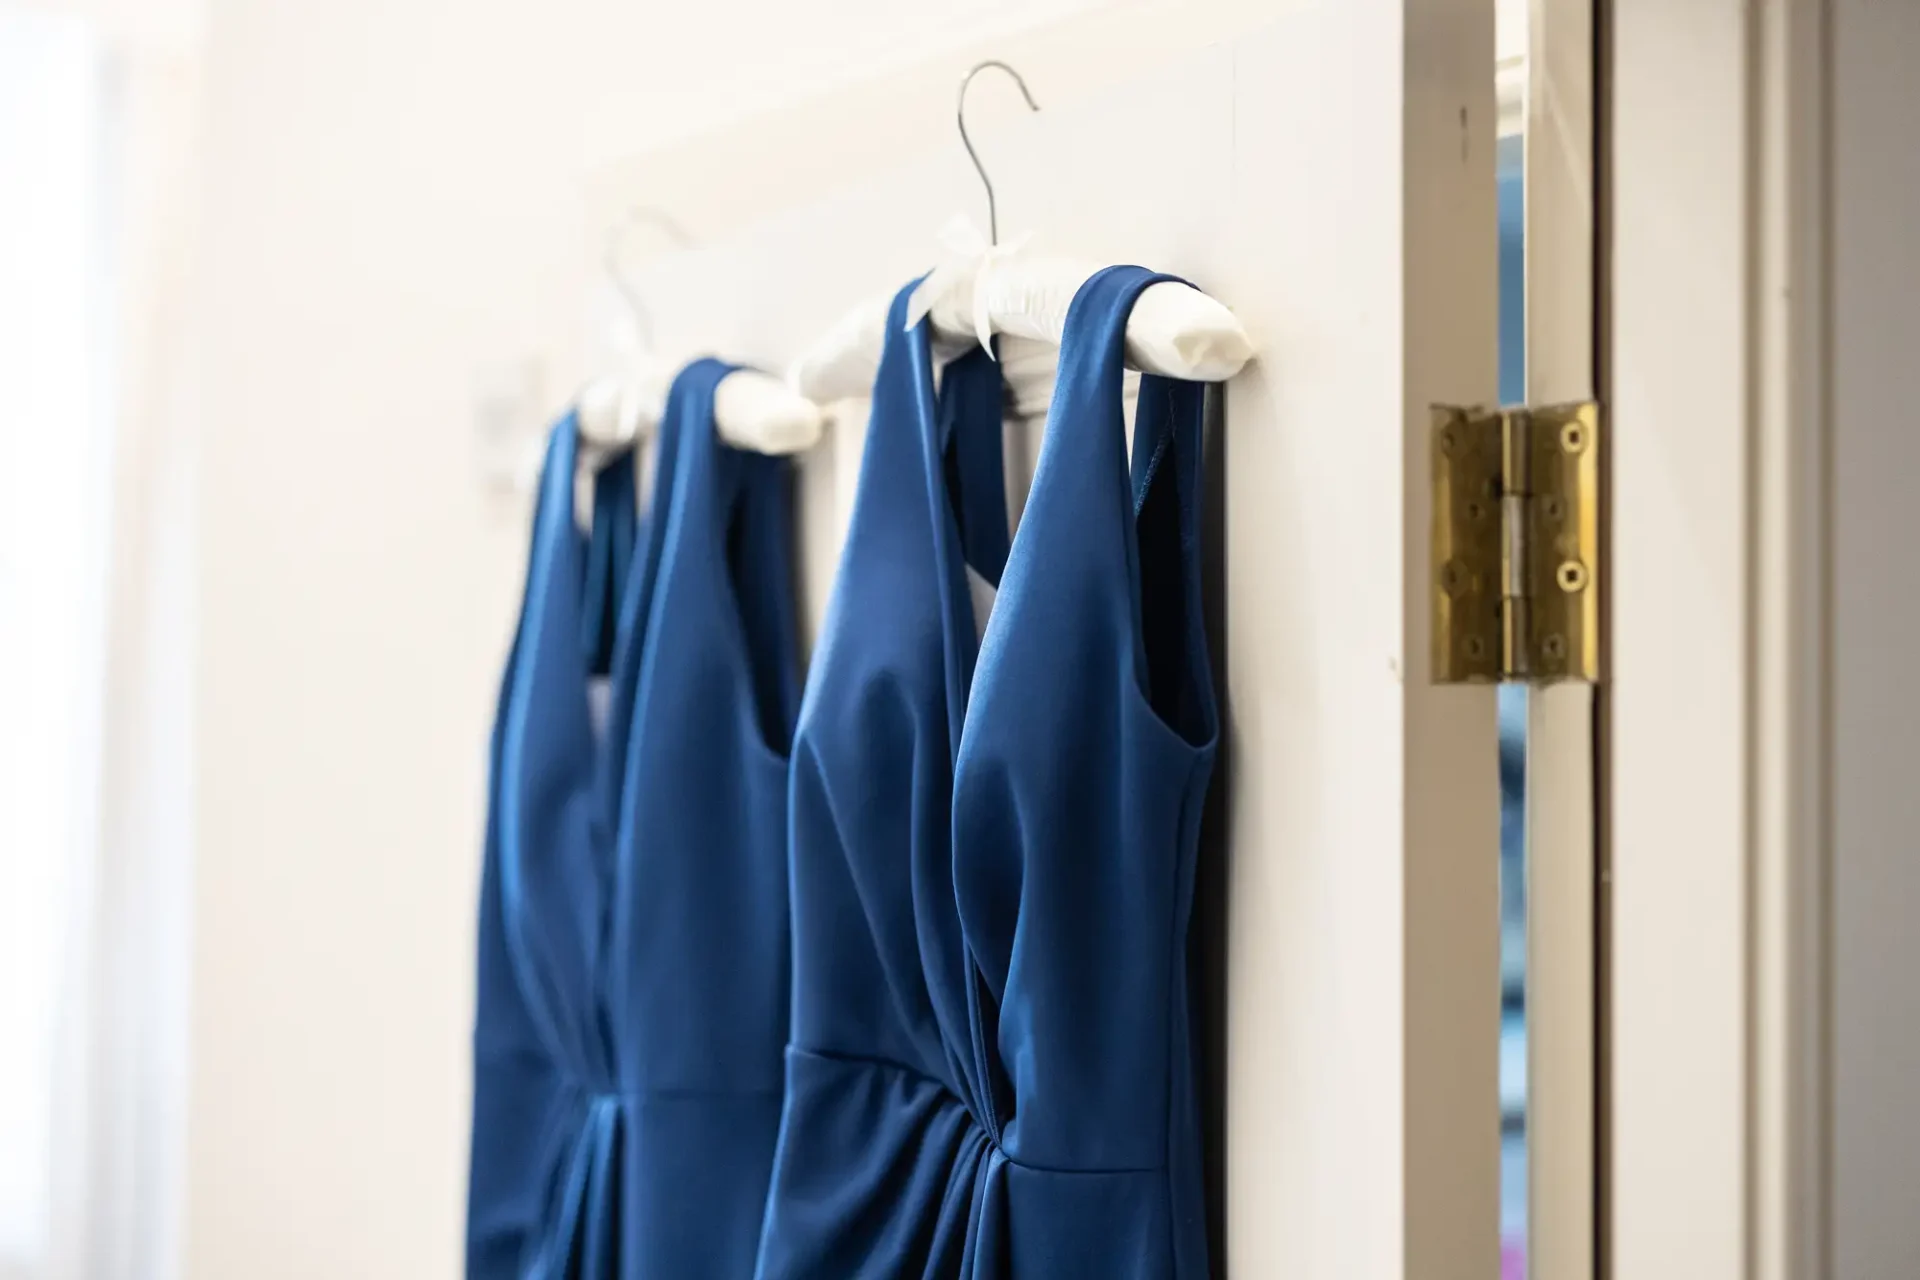 Blue dresses hanging on white hangers against a white door with a metallic lock.